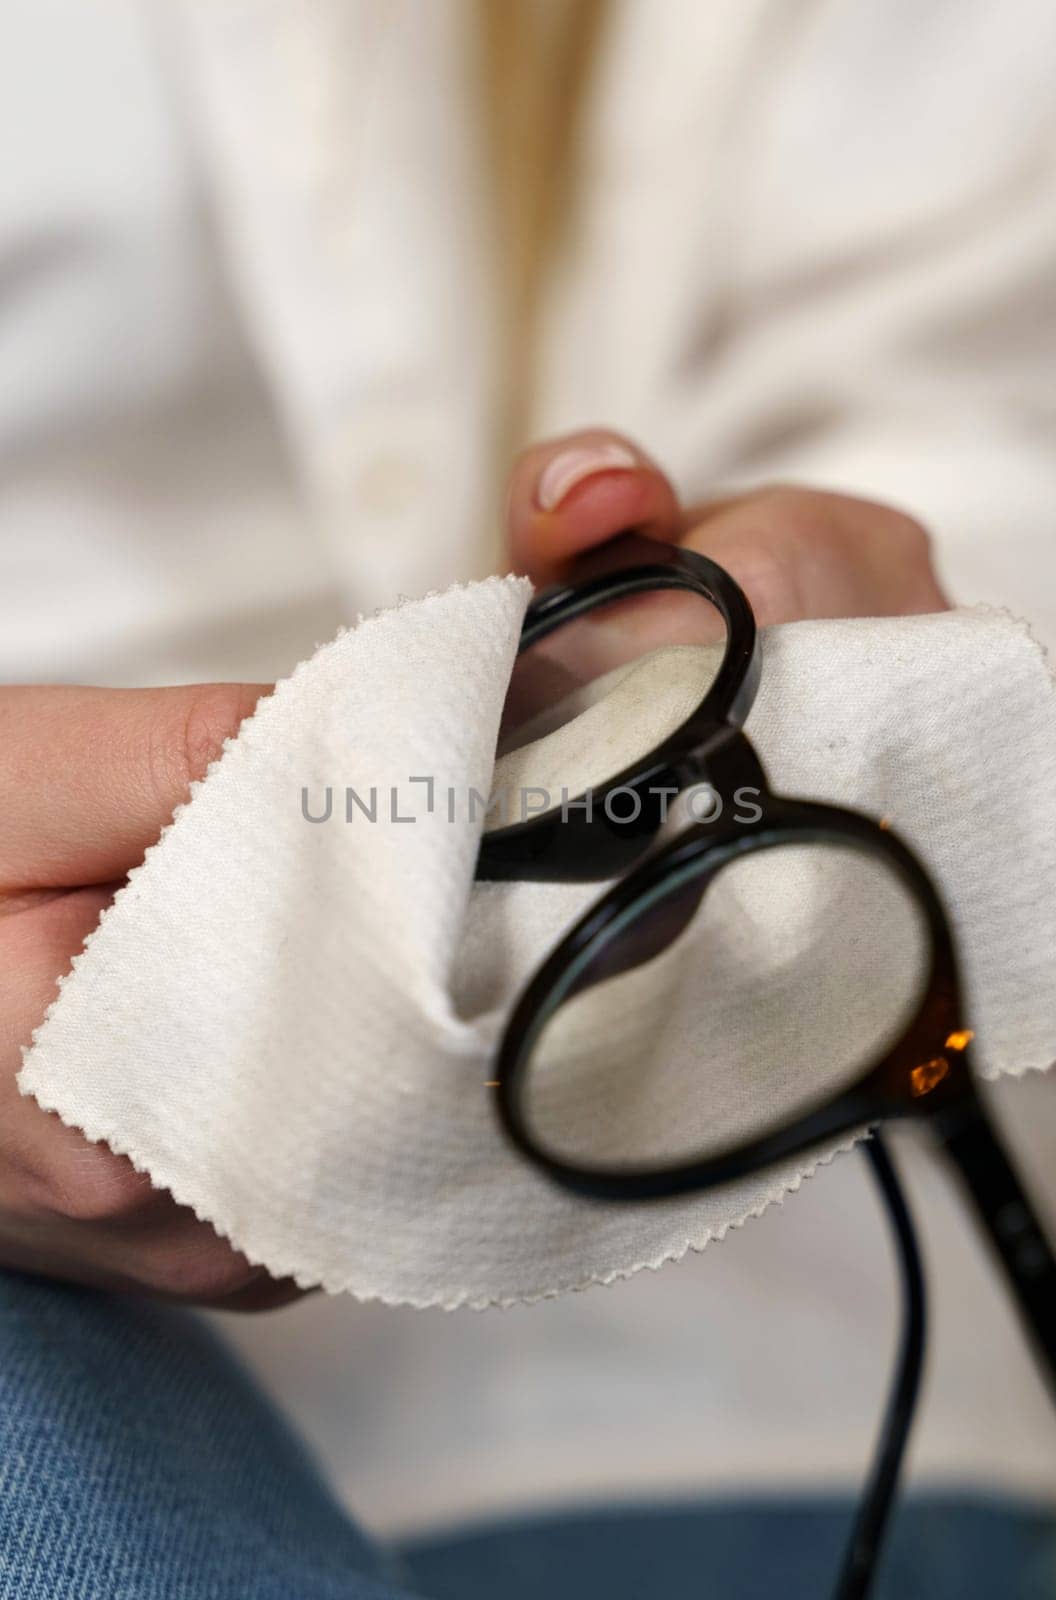 Close-up of women's hands cleaning glasses with a special cloth. Vertical frame.